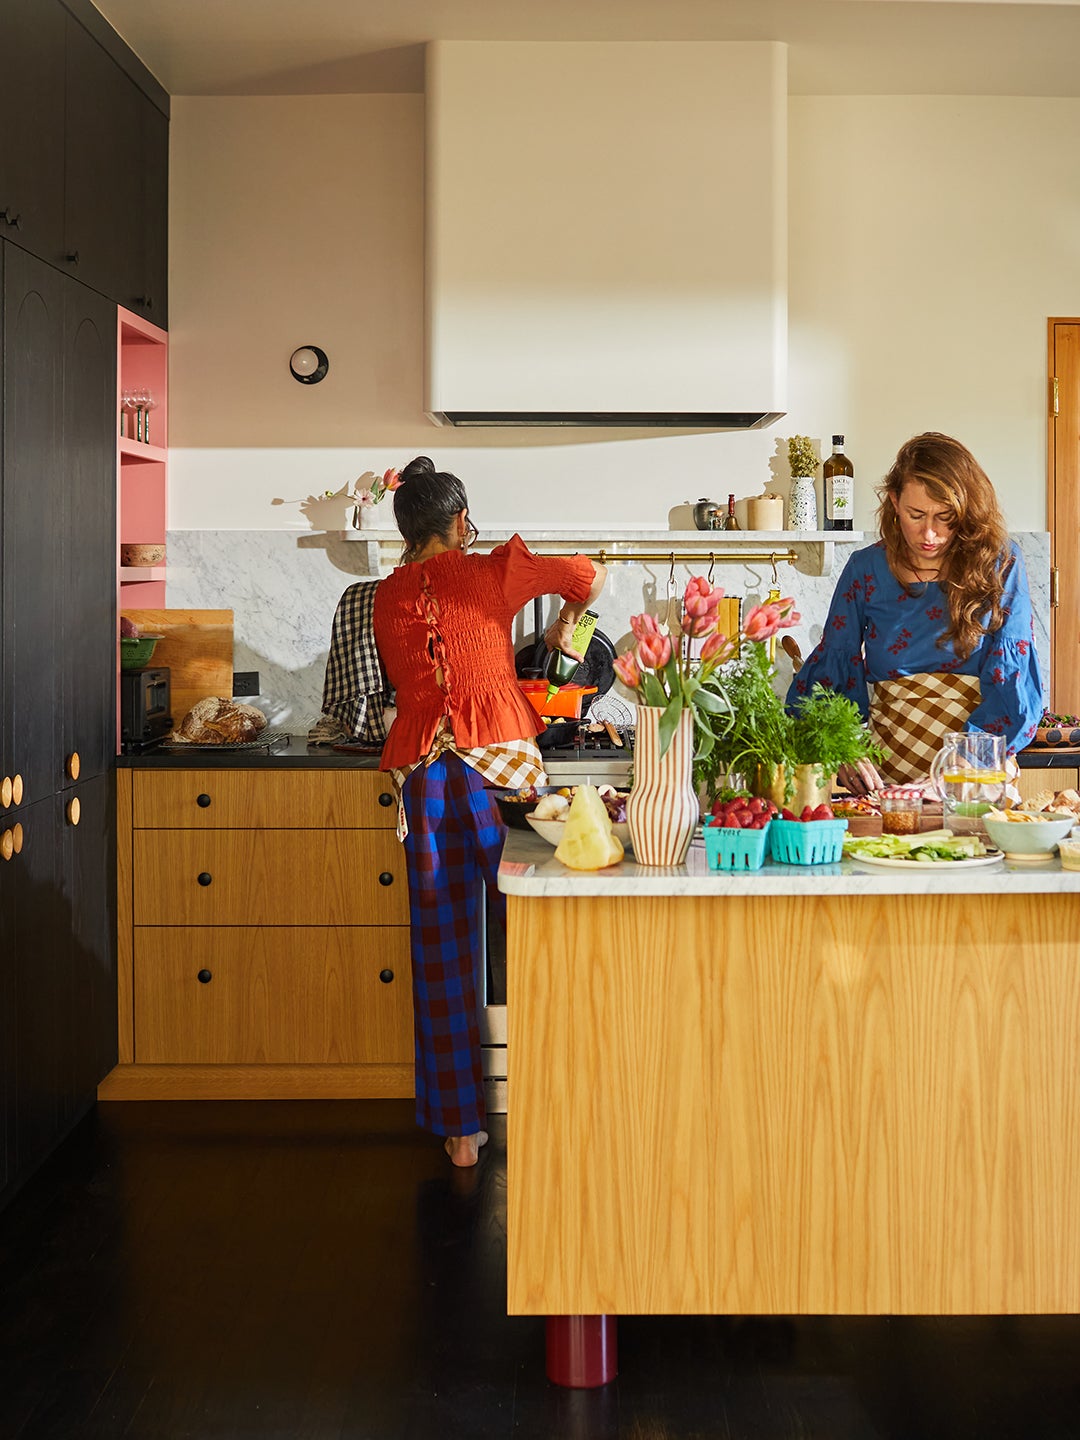 Two women prepping food in a kitchen